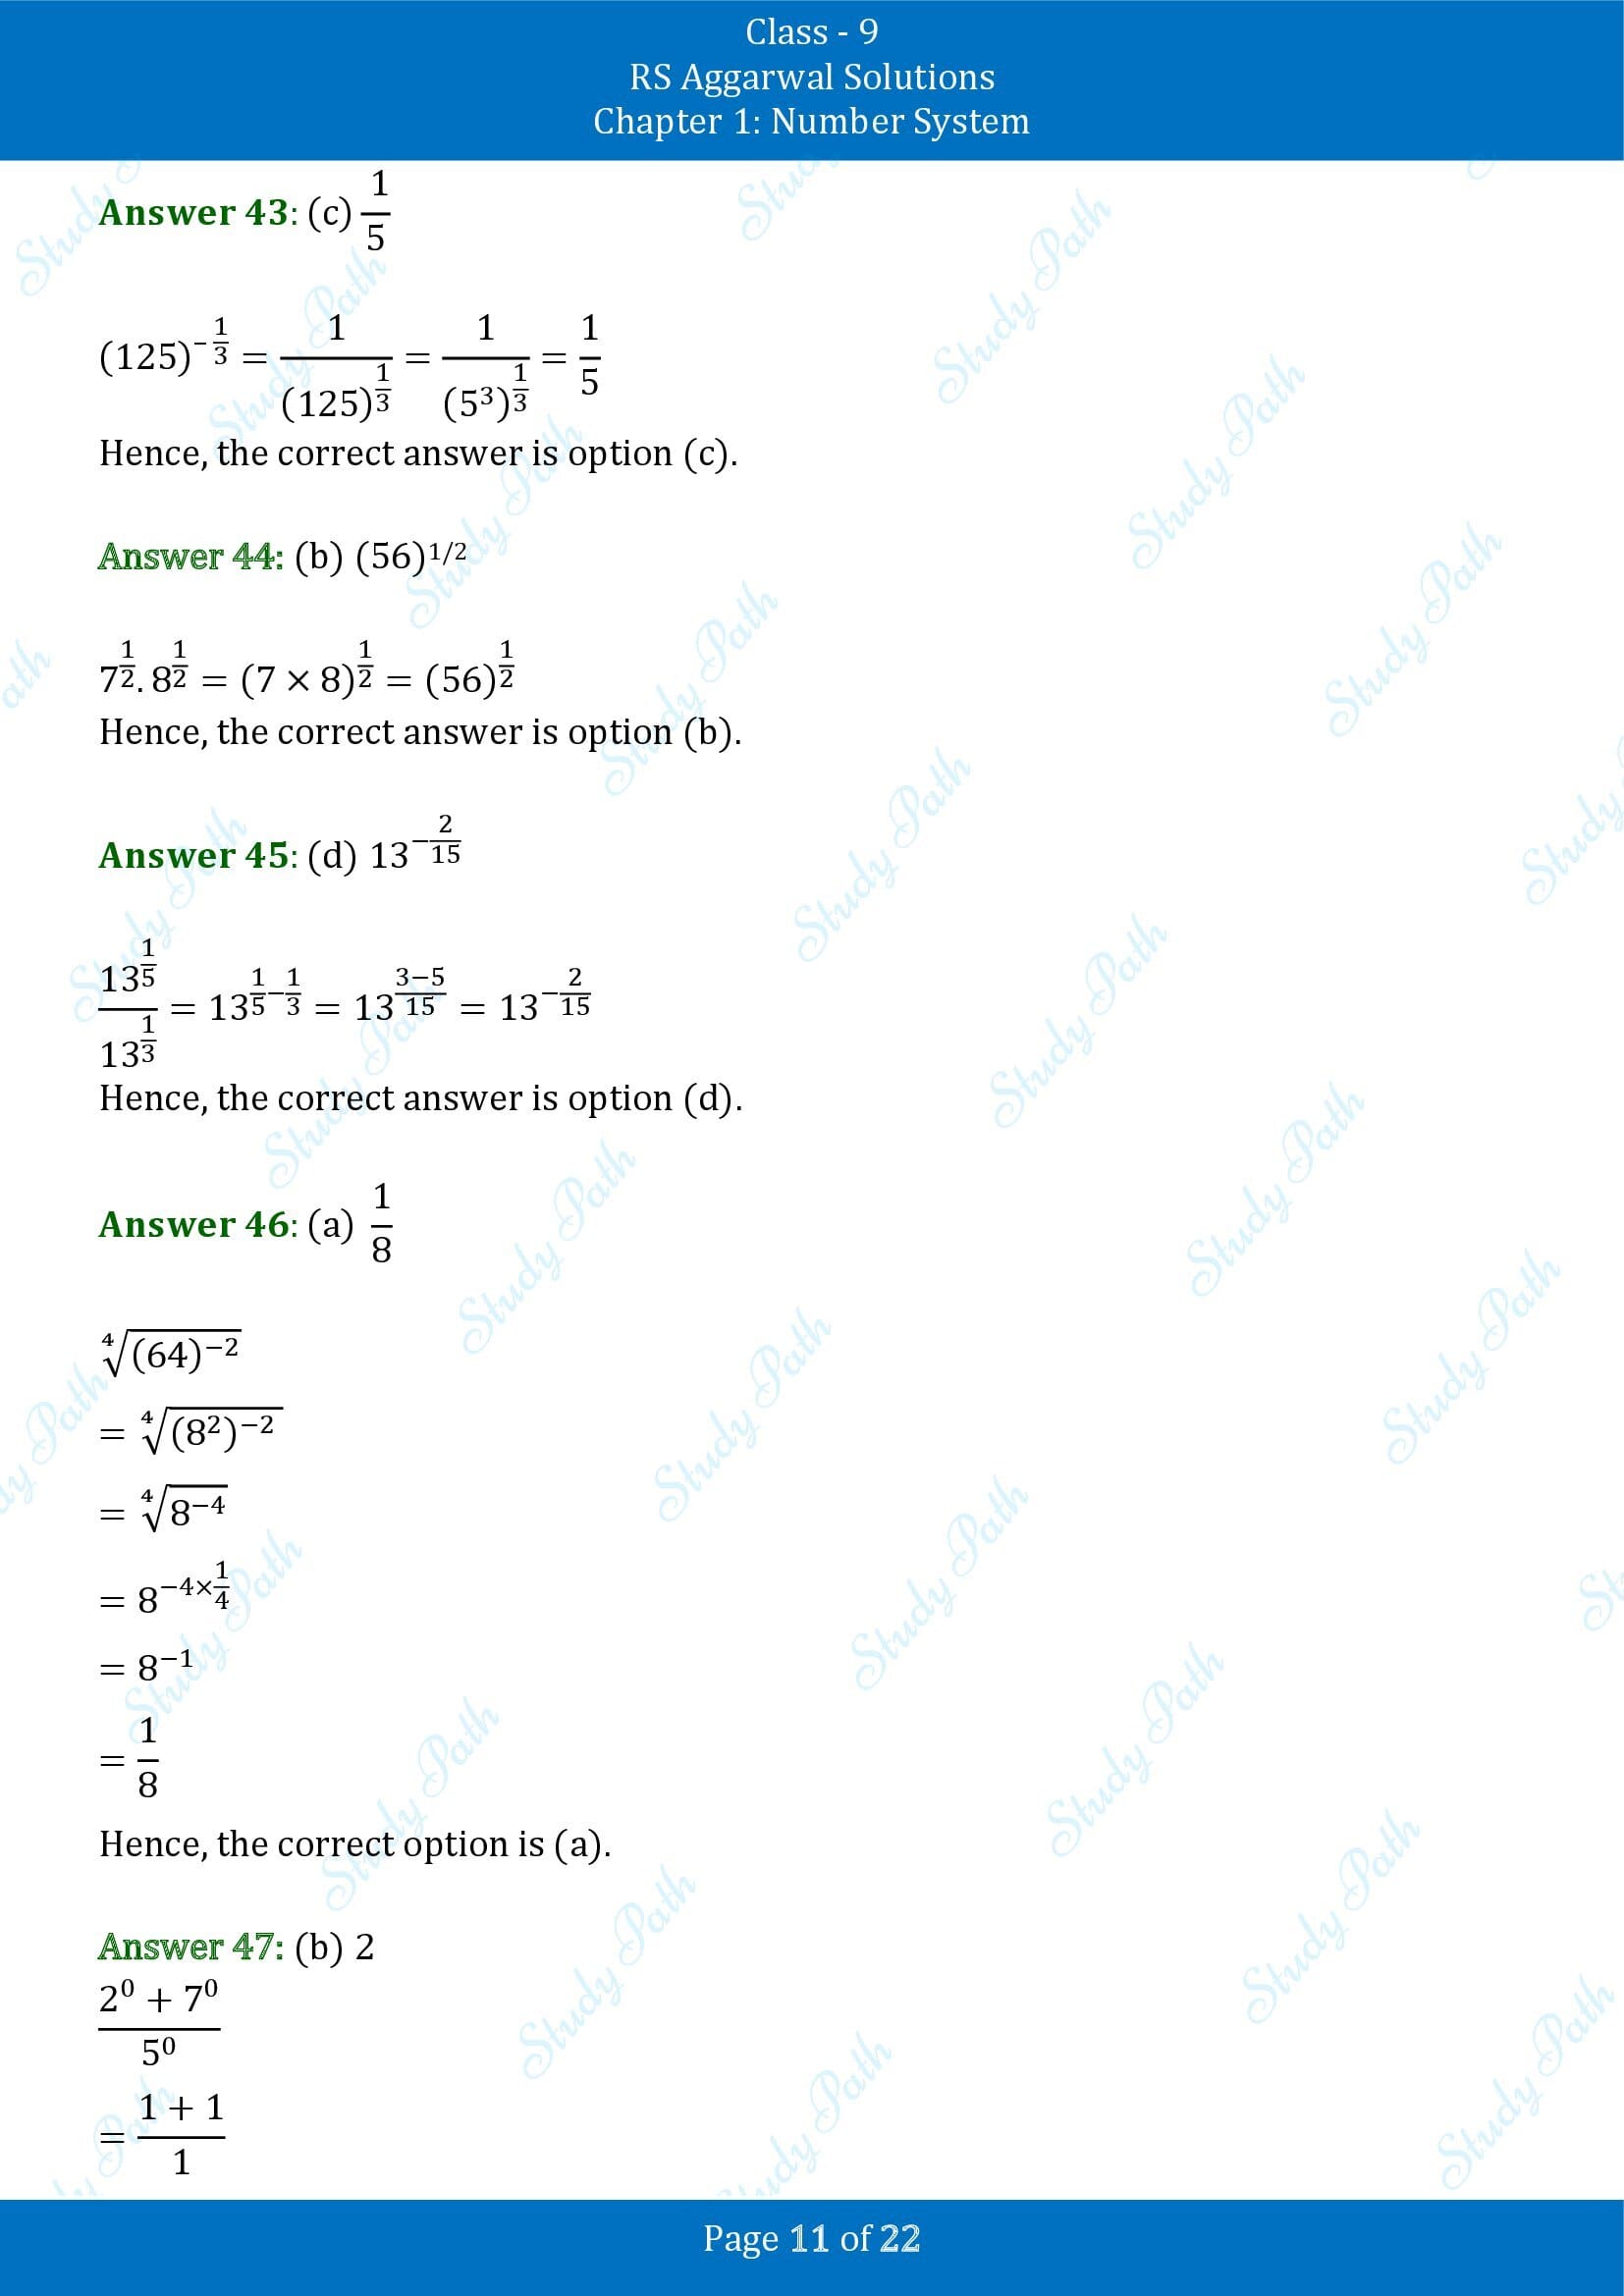 RS Aggarwal Solutions Class 9 Chapter 1 Number System Multiple Choice Questions MCQs 00011